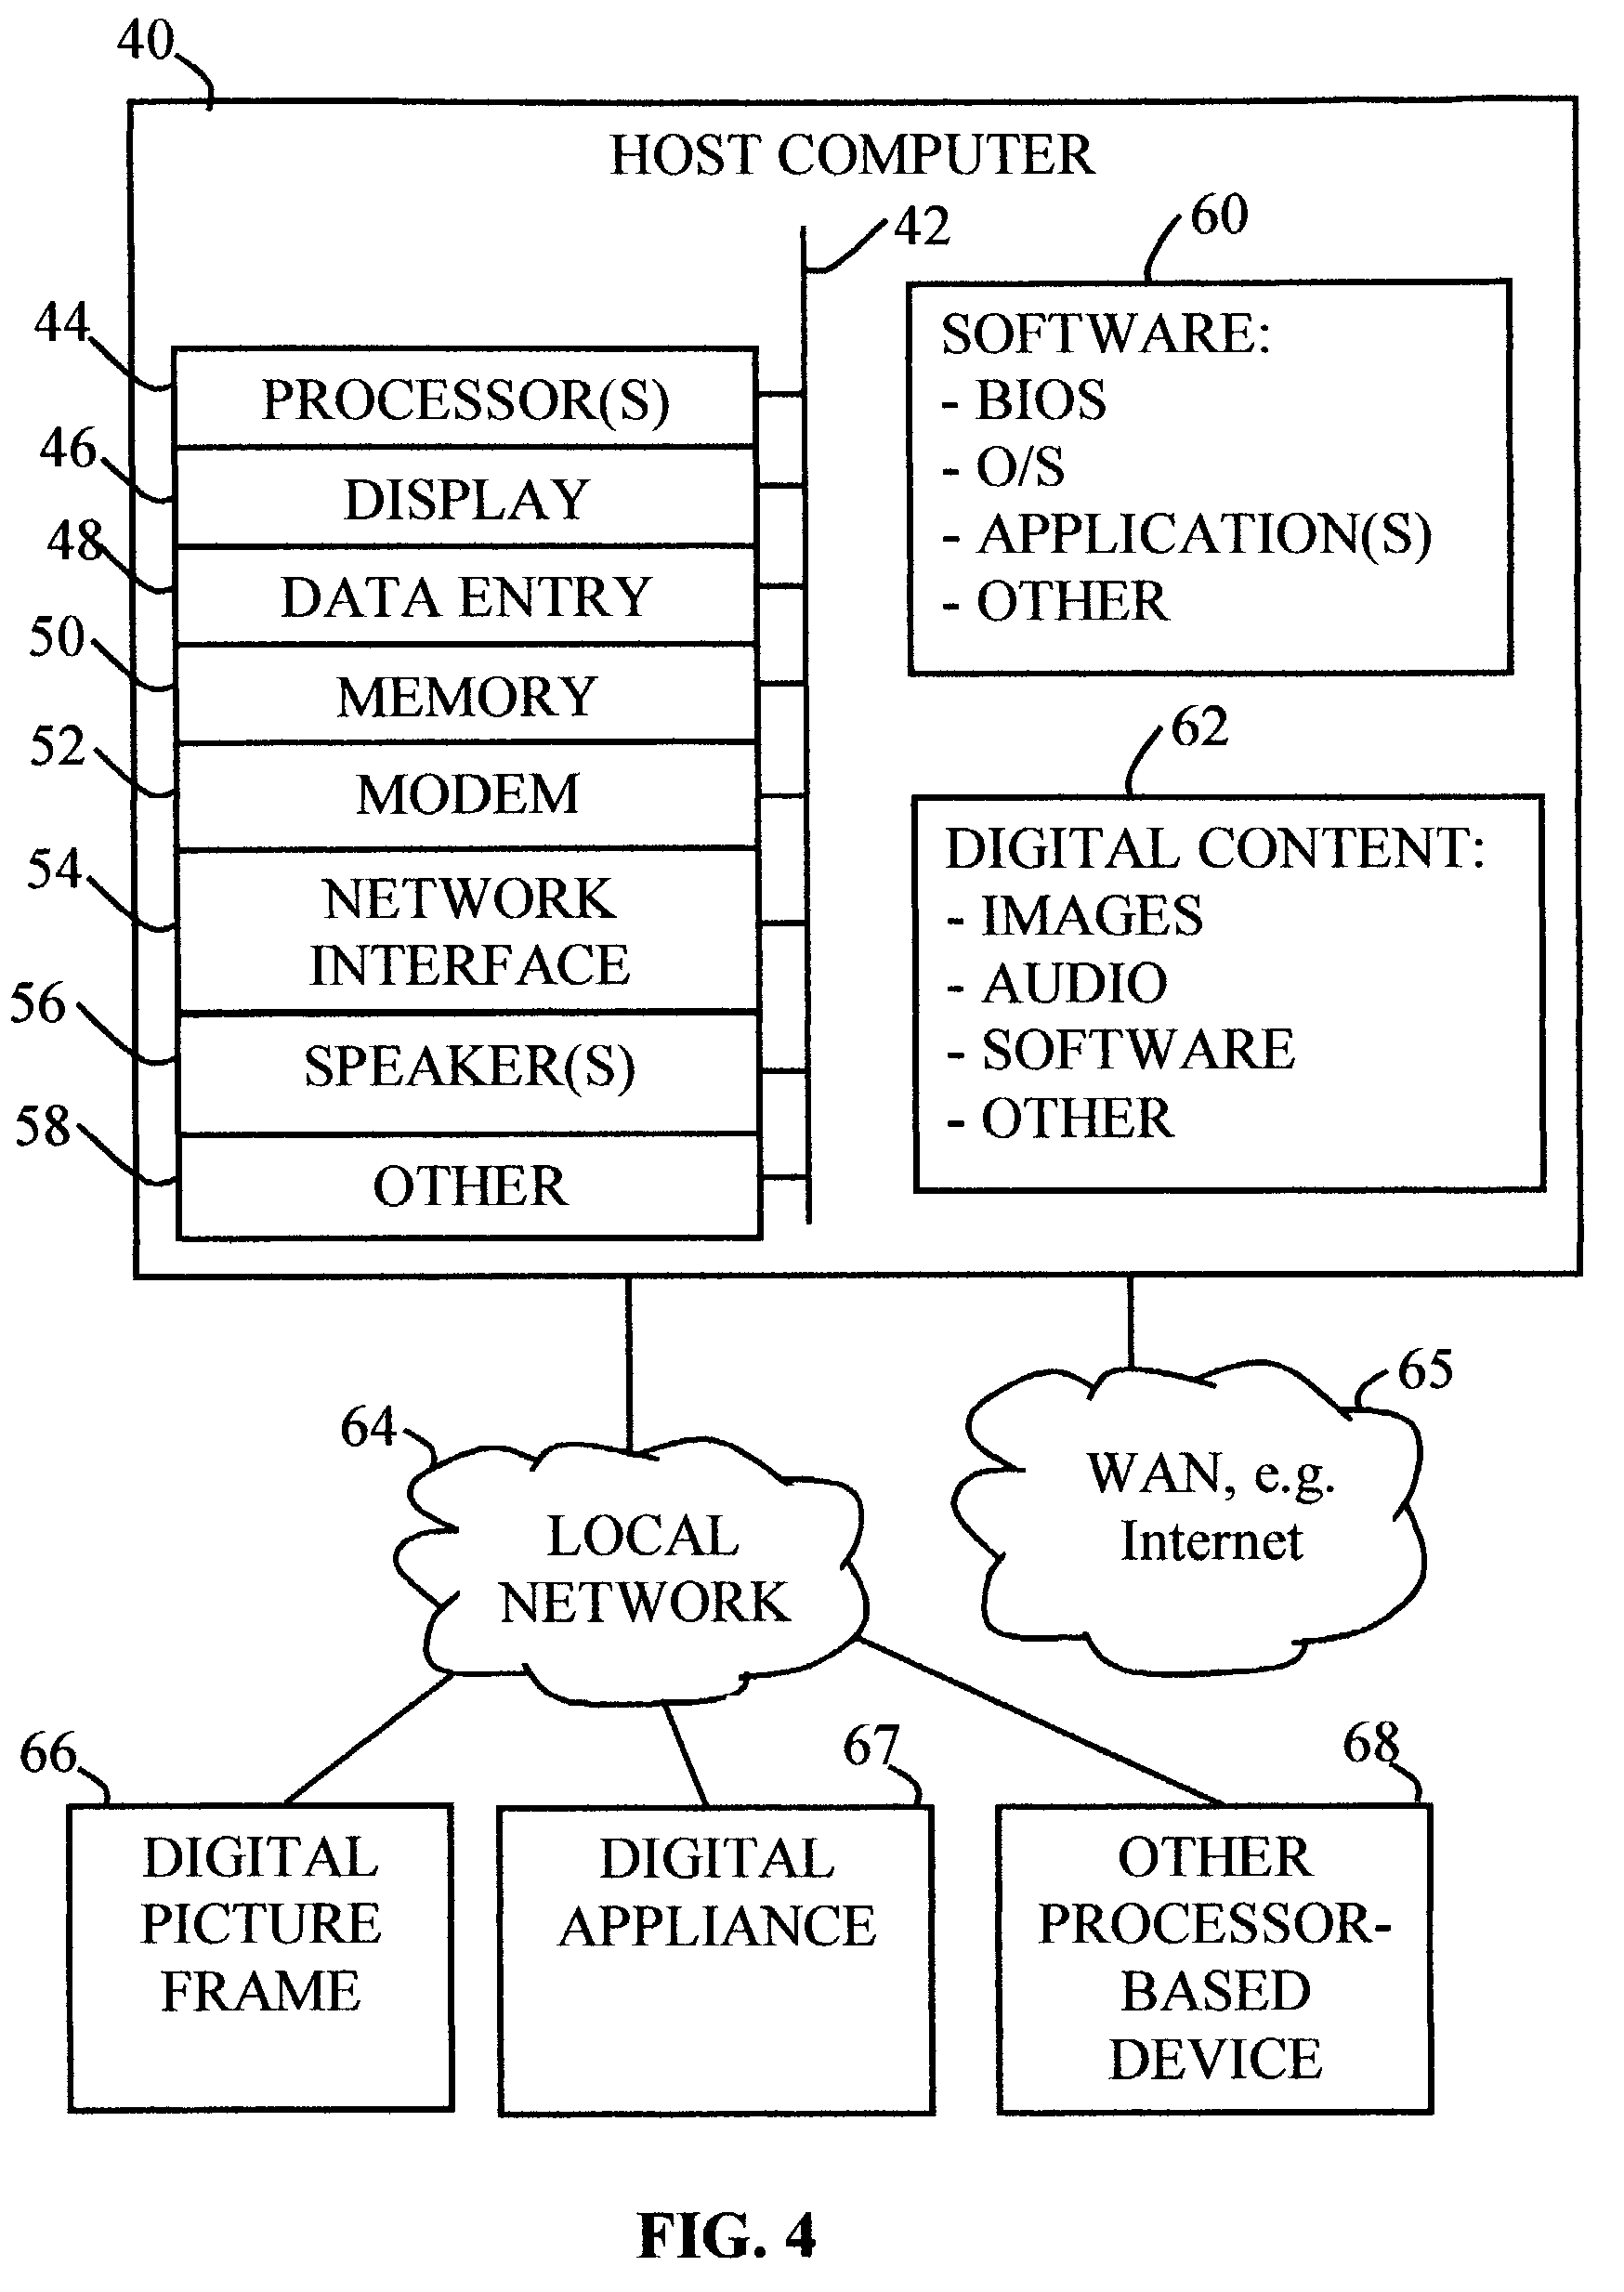 User interface to facilitate exchanging files among processor-based devices